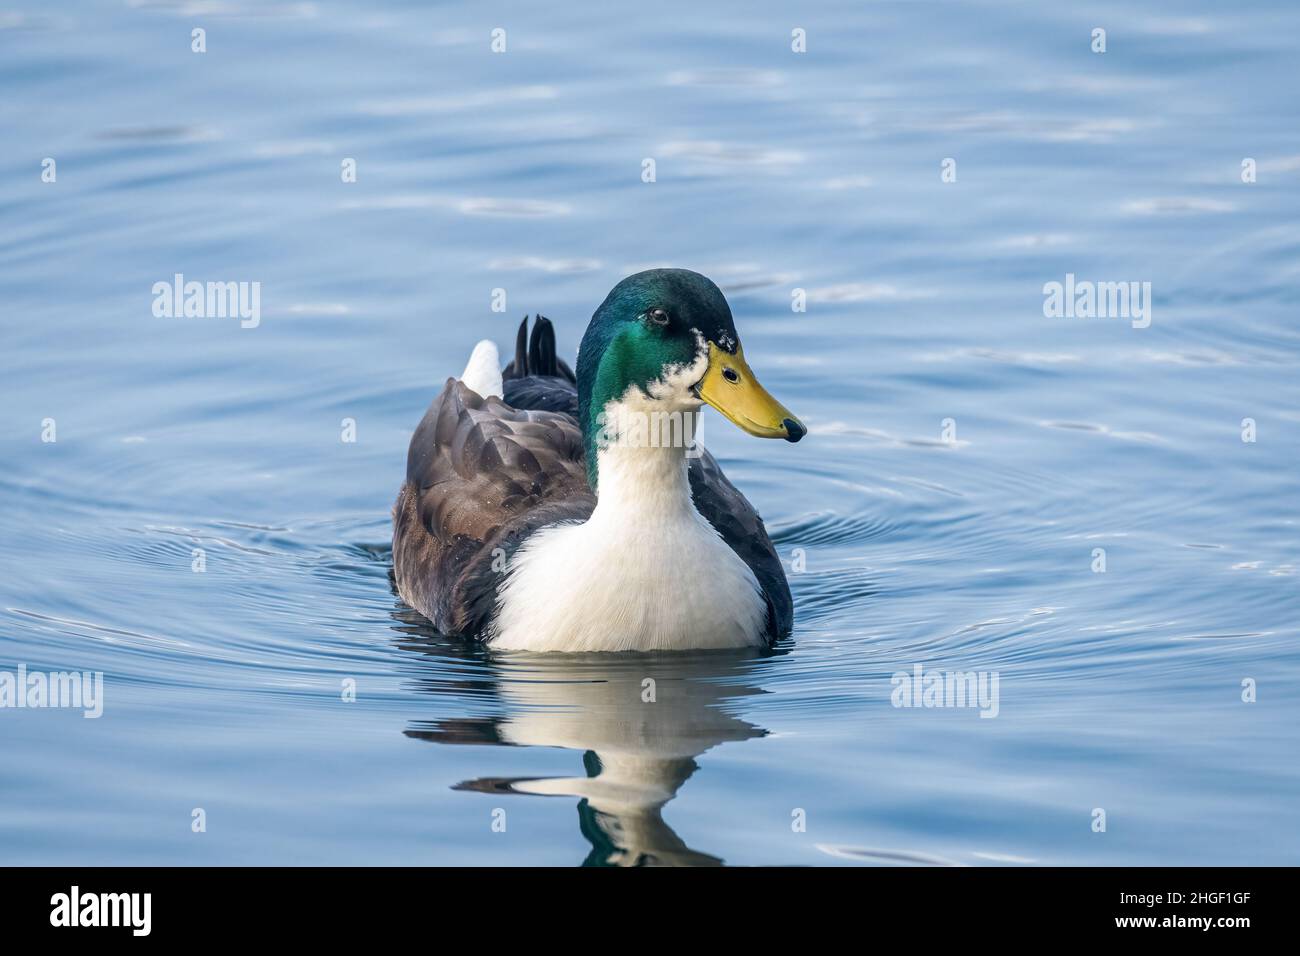 A farm yard duck swimming on a pond at a UK nature reserve. Stock Photo